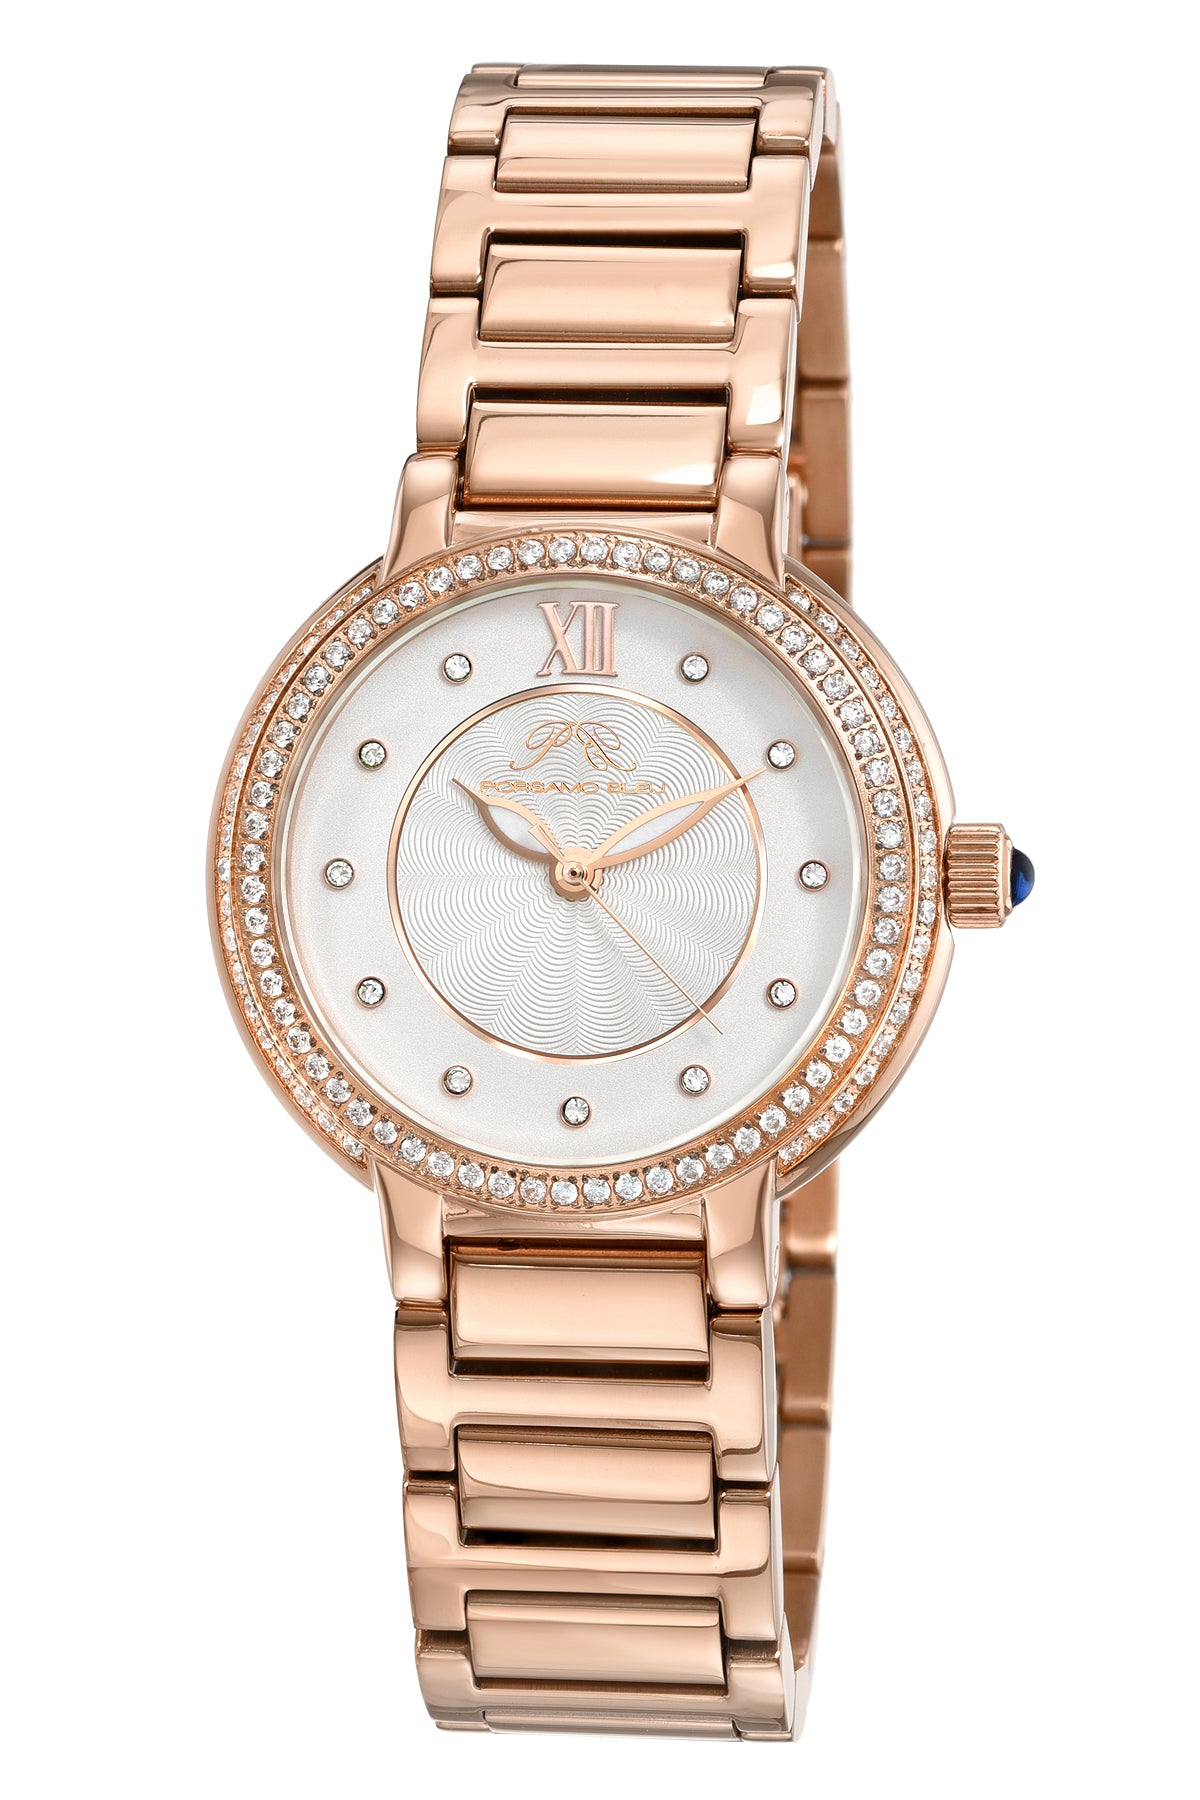 Porsamo Bleu Stella Luxury Crystal Womens Stainless Steel Watch, Rose With Silver Guilloche And Sunray Dial 1191CSTS